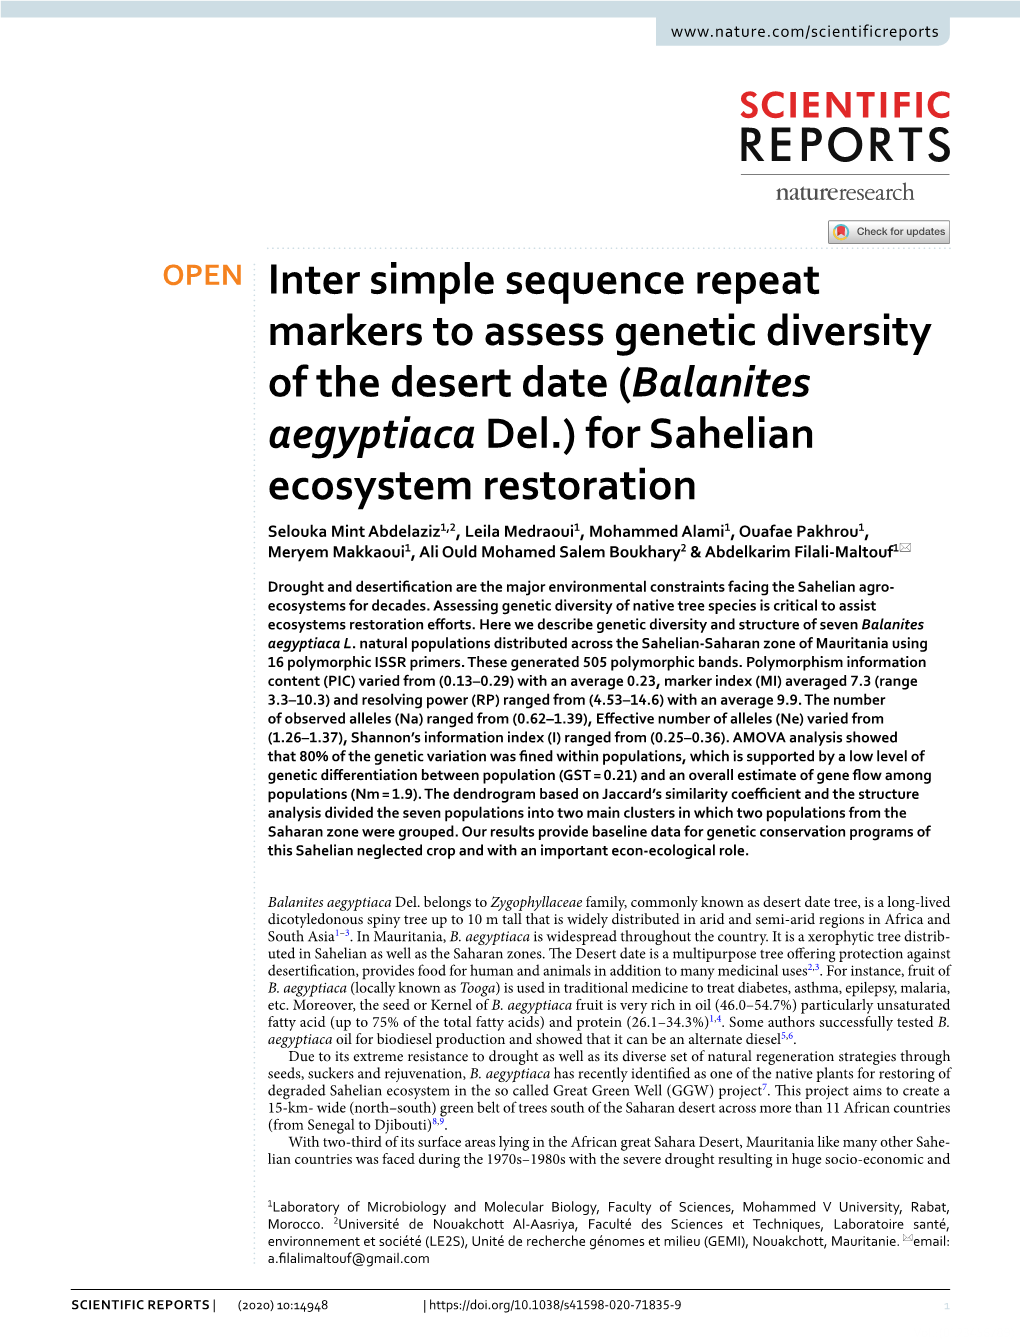 Inter Simple Sequence Repeat Markers to Assess Genetic Diversity